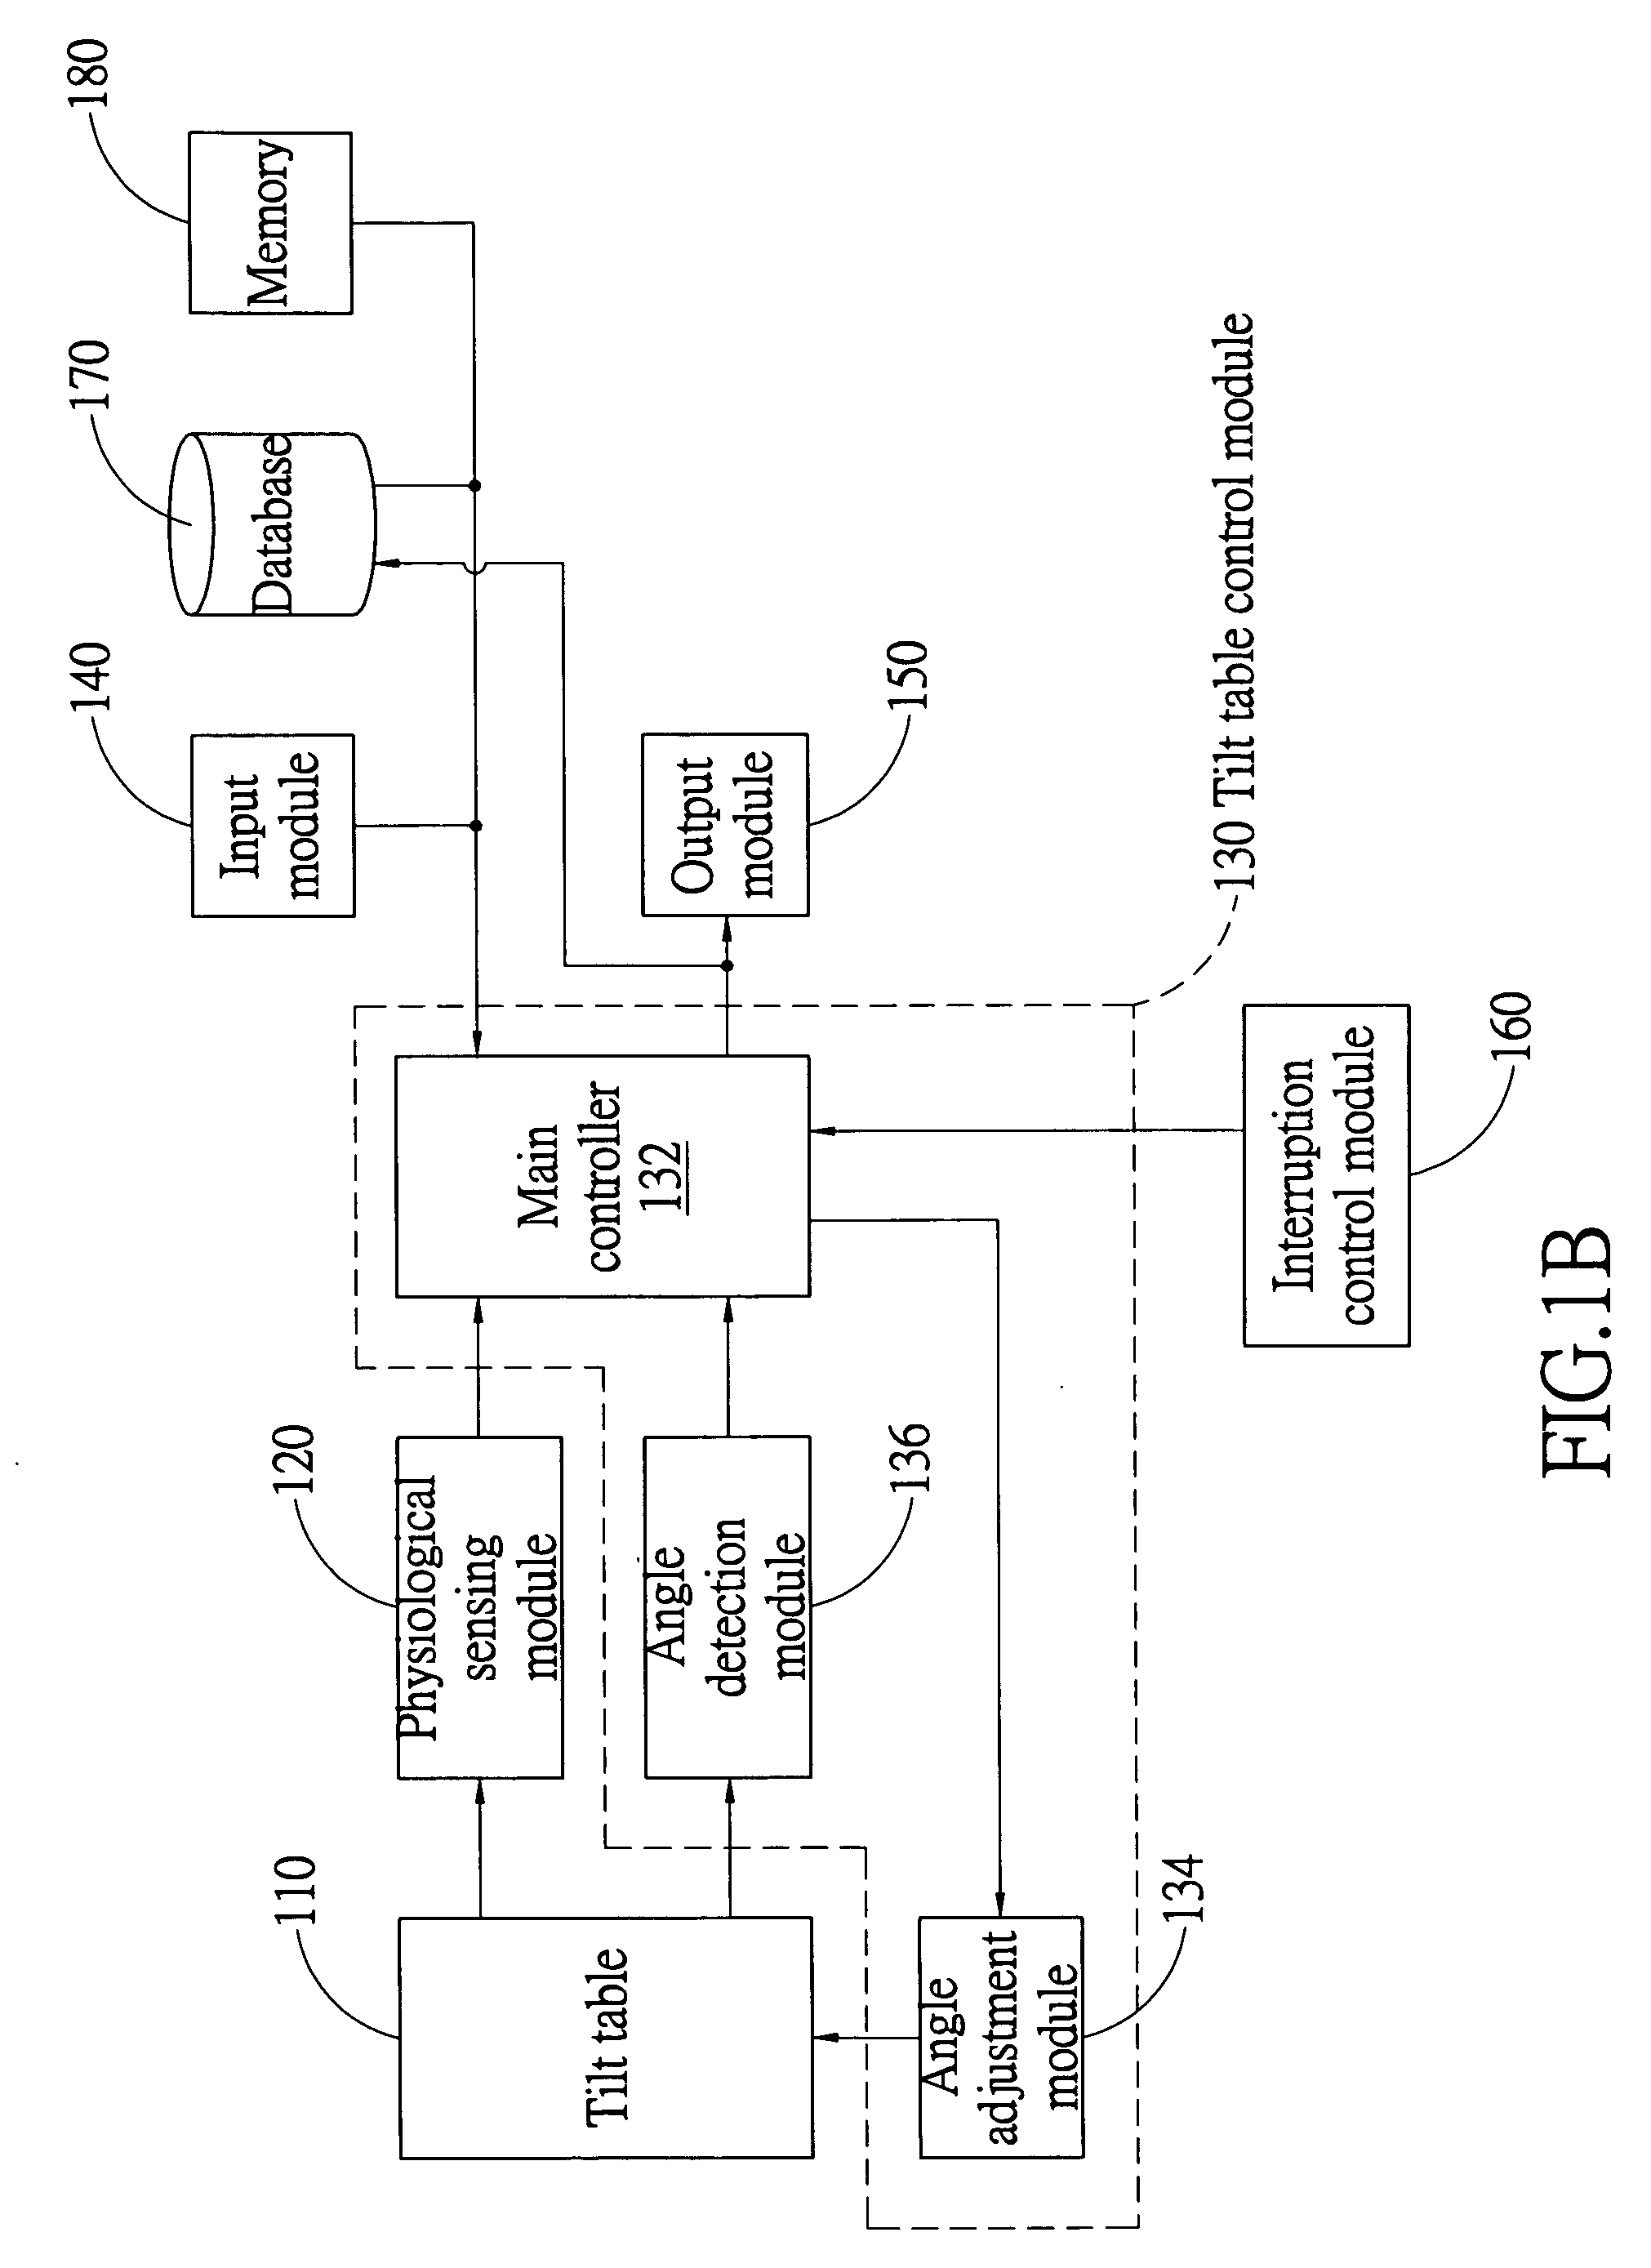 System and method for controlling a tilt table